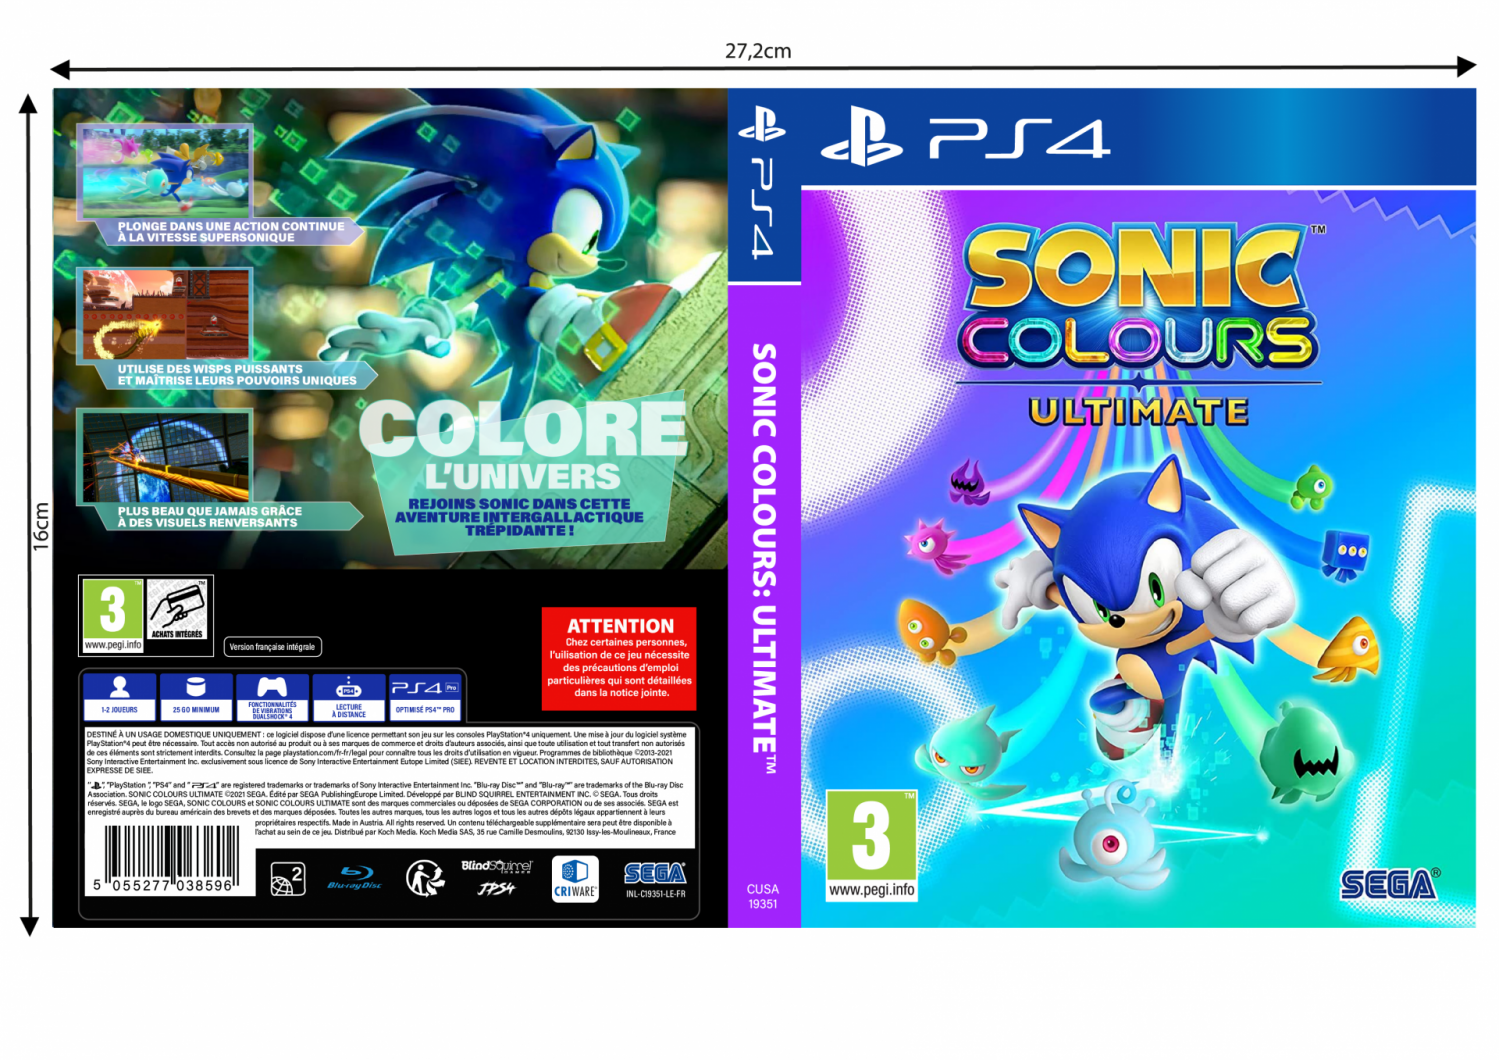 Sonic colours ultimate